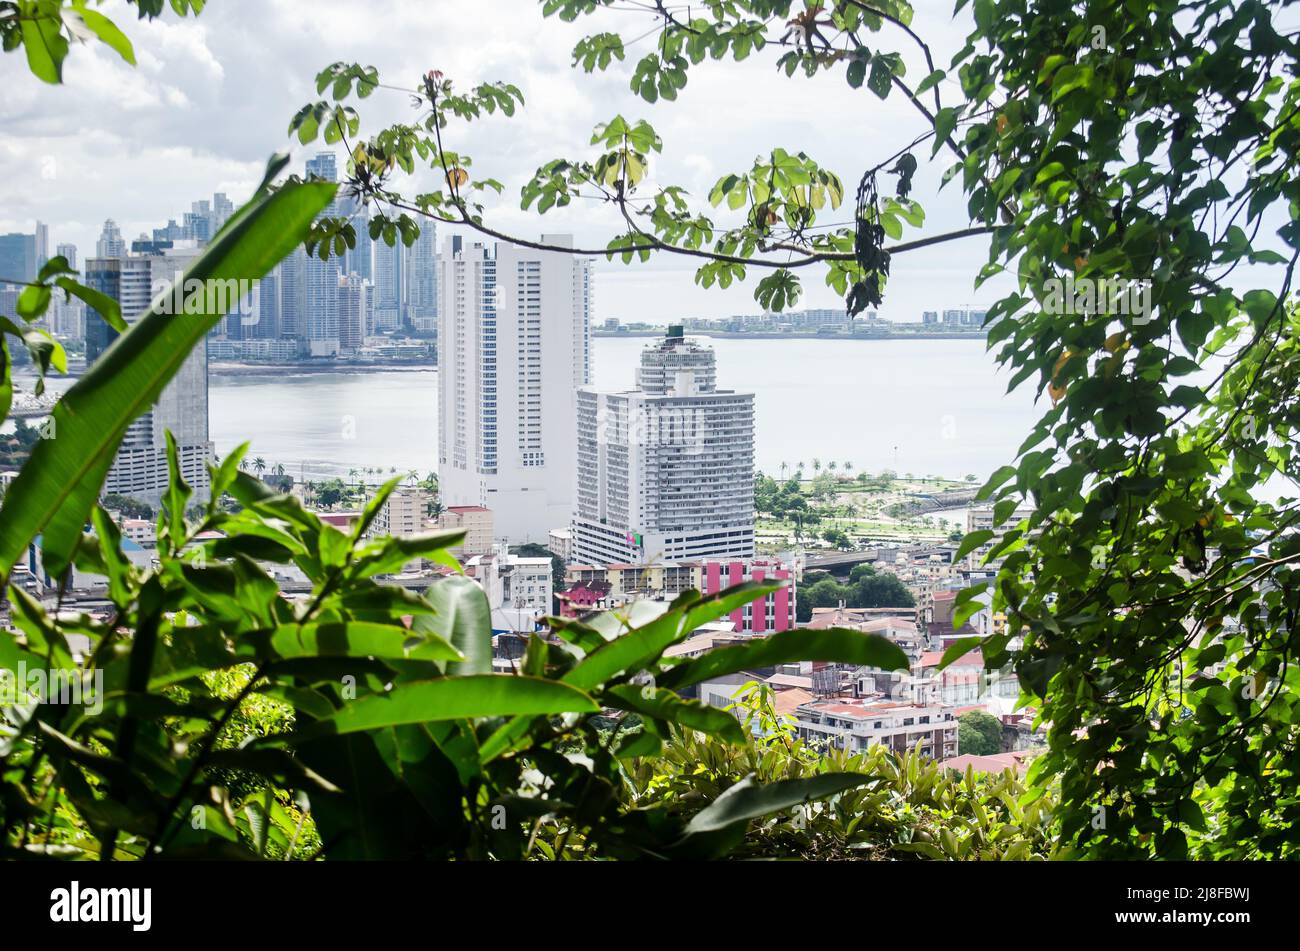 Panama City as seen from the Ancon Hill Stock Photo